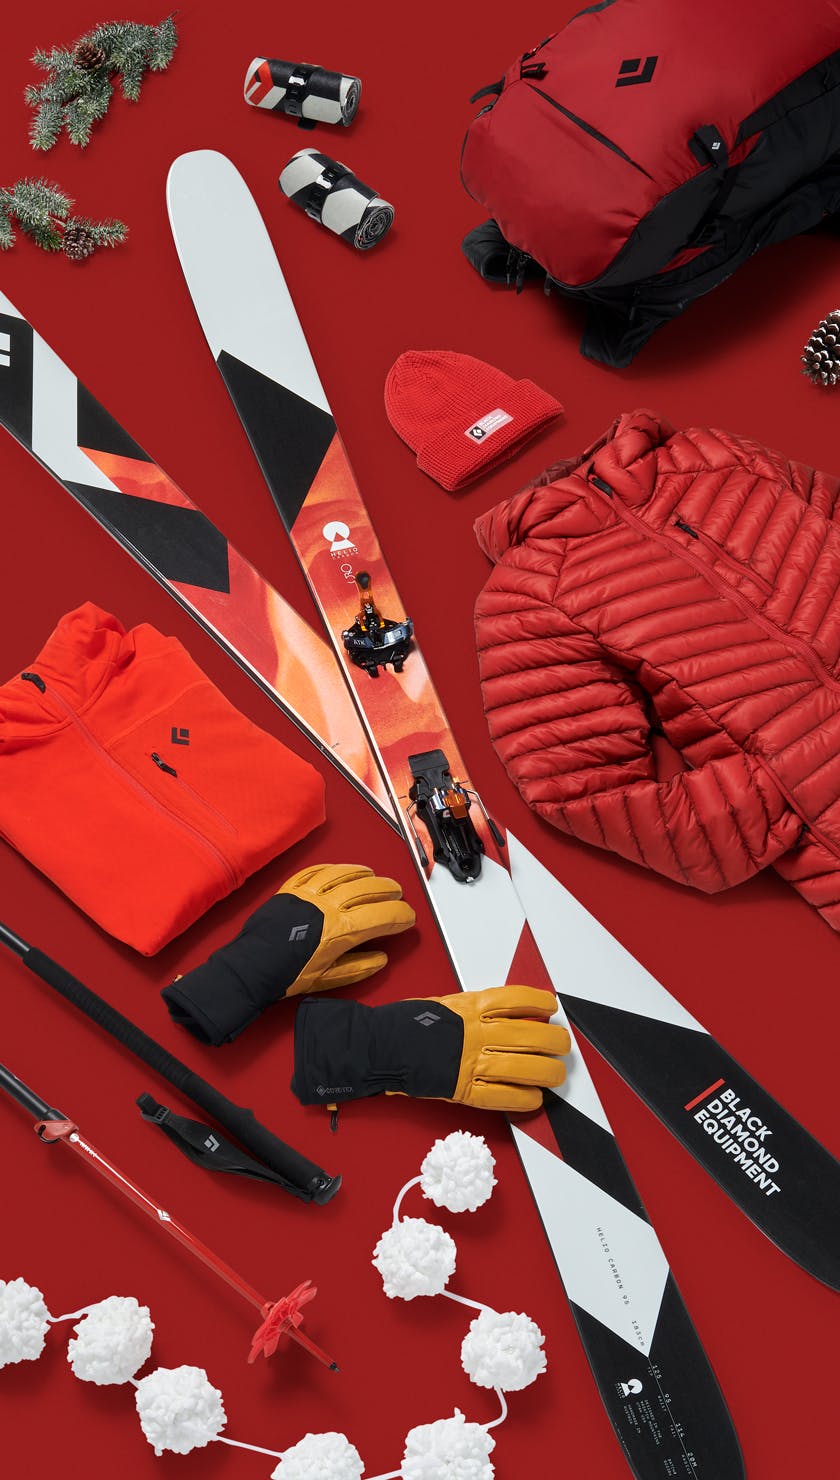 A lay down image of a Black Diamond Ski kit with a red holiday theme.  